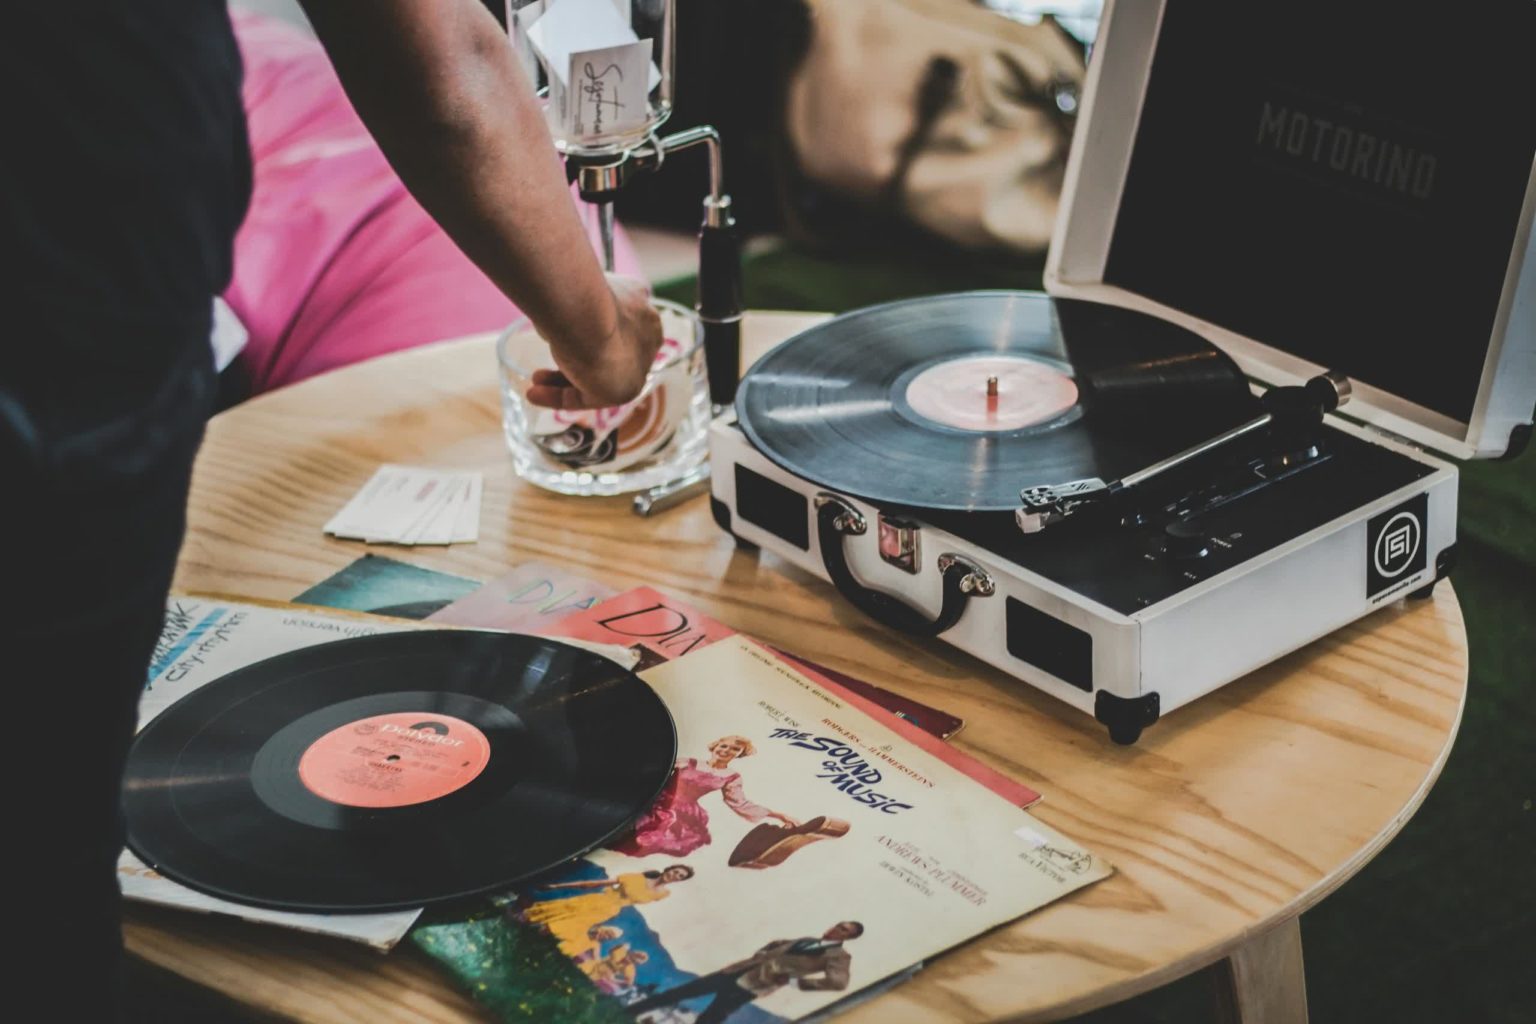 Vinyl records outsell CDs for the second consecutive year